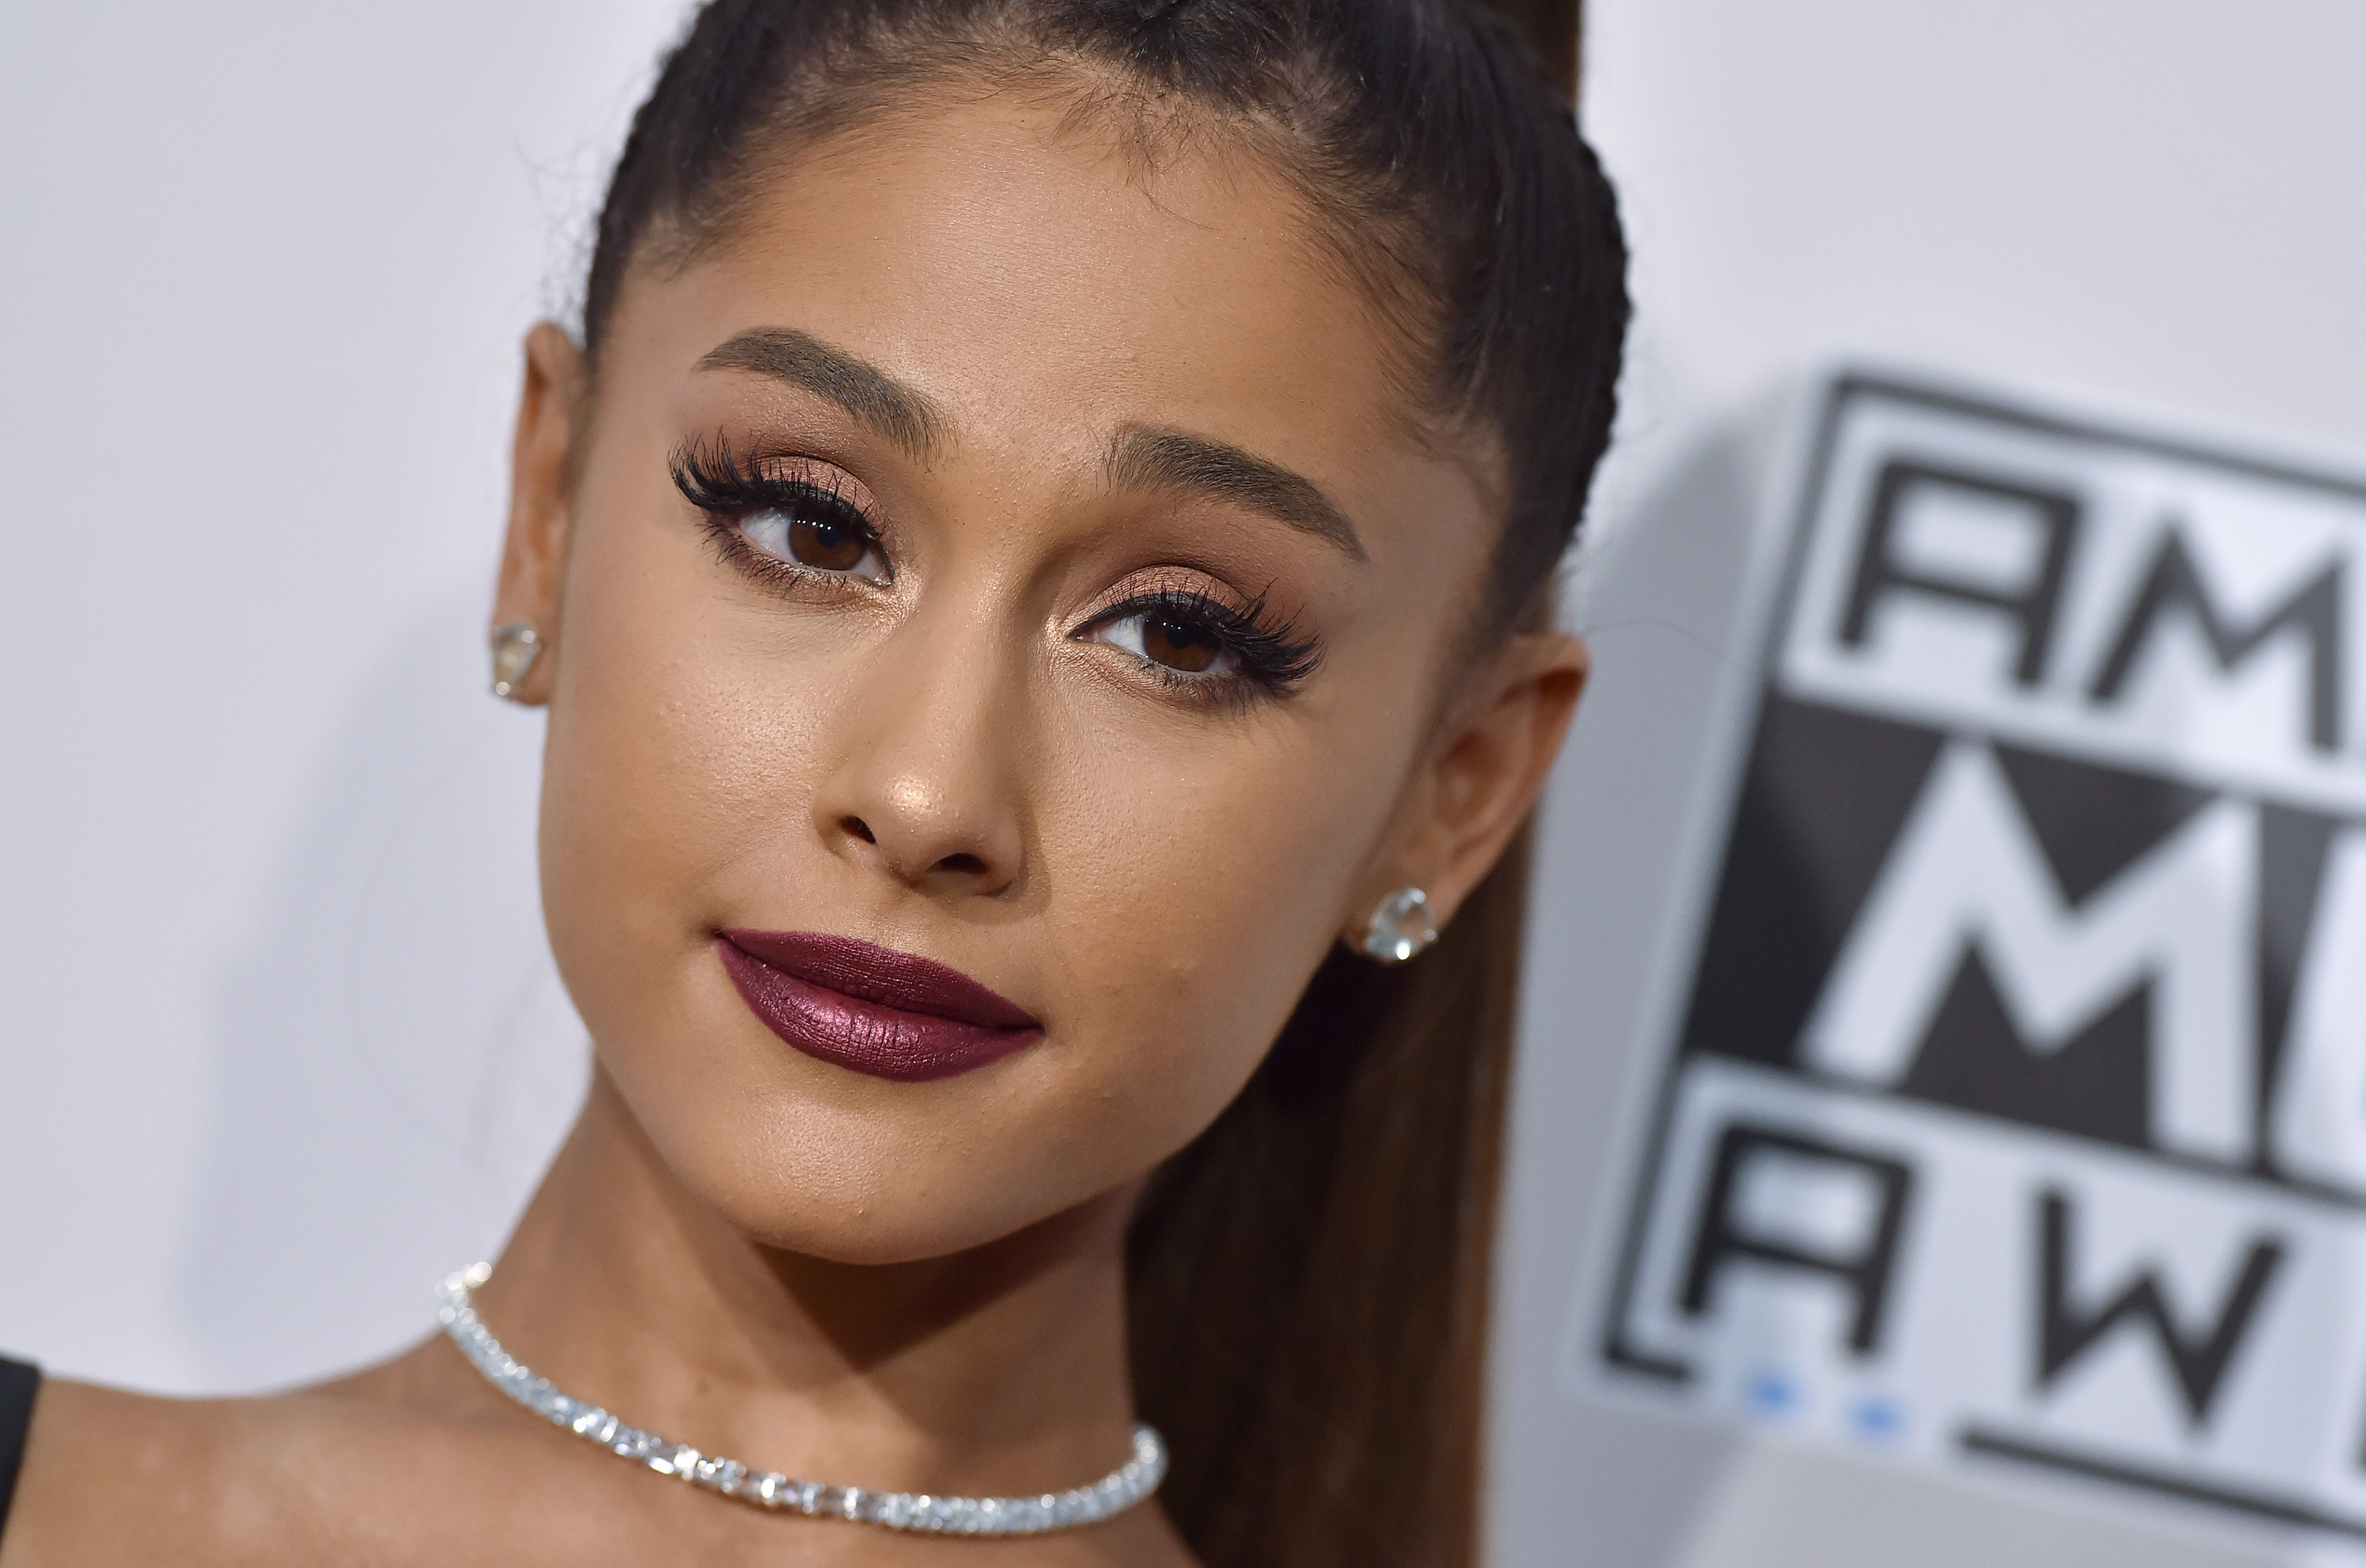 Singer Ariana Grande arrives at the 2016 American Music Awards on November 20, 2016 in Los Angeles, California.